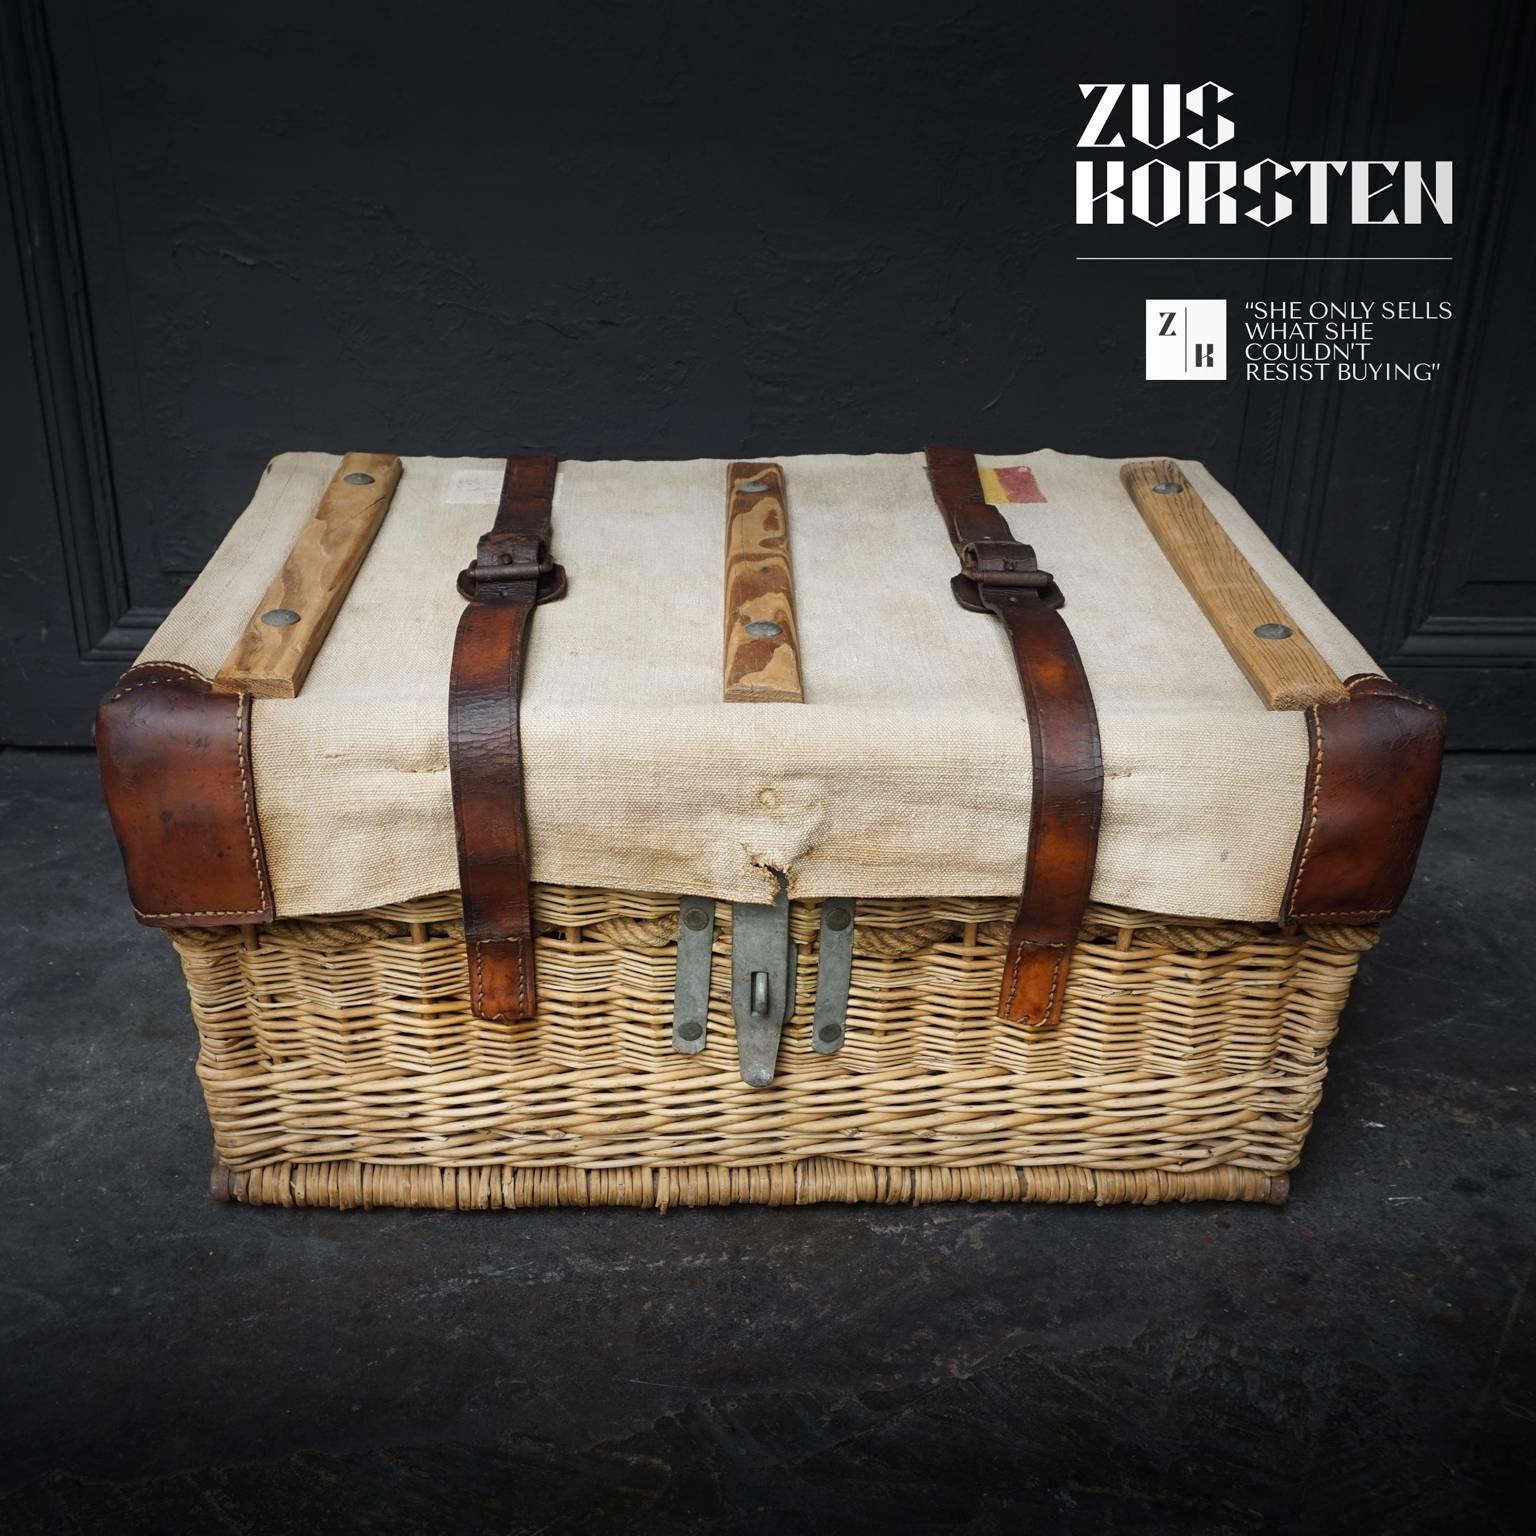 This beautiful decorative rattan trunk was used to transport mail from Belgium to Congo and back. Congo, Afrika, was a Belgian colony between 1908-1960. 

The lid is covered with water repellent coarsely woven canvas and pieces of wood so they